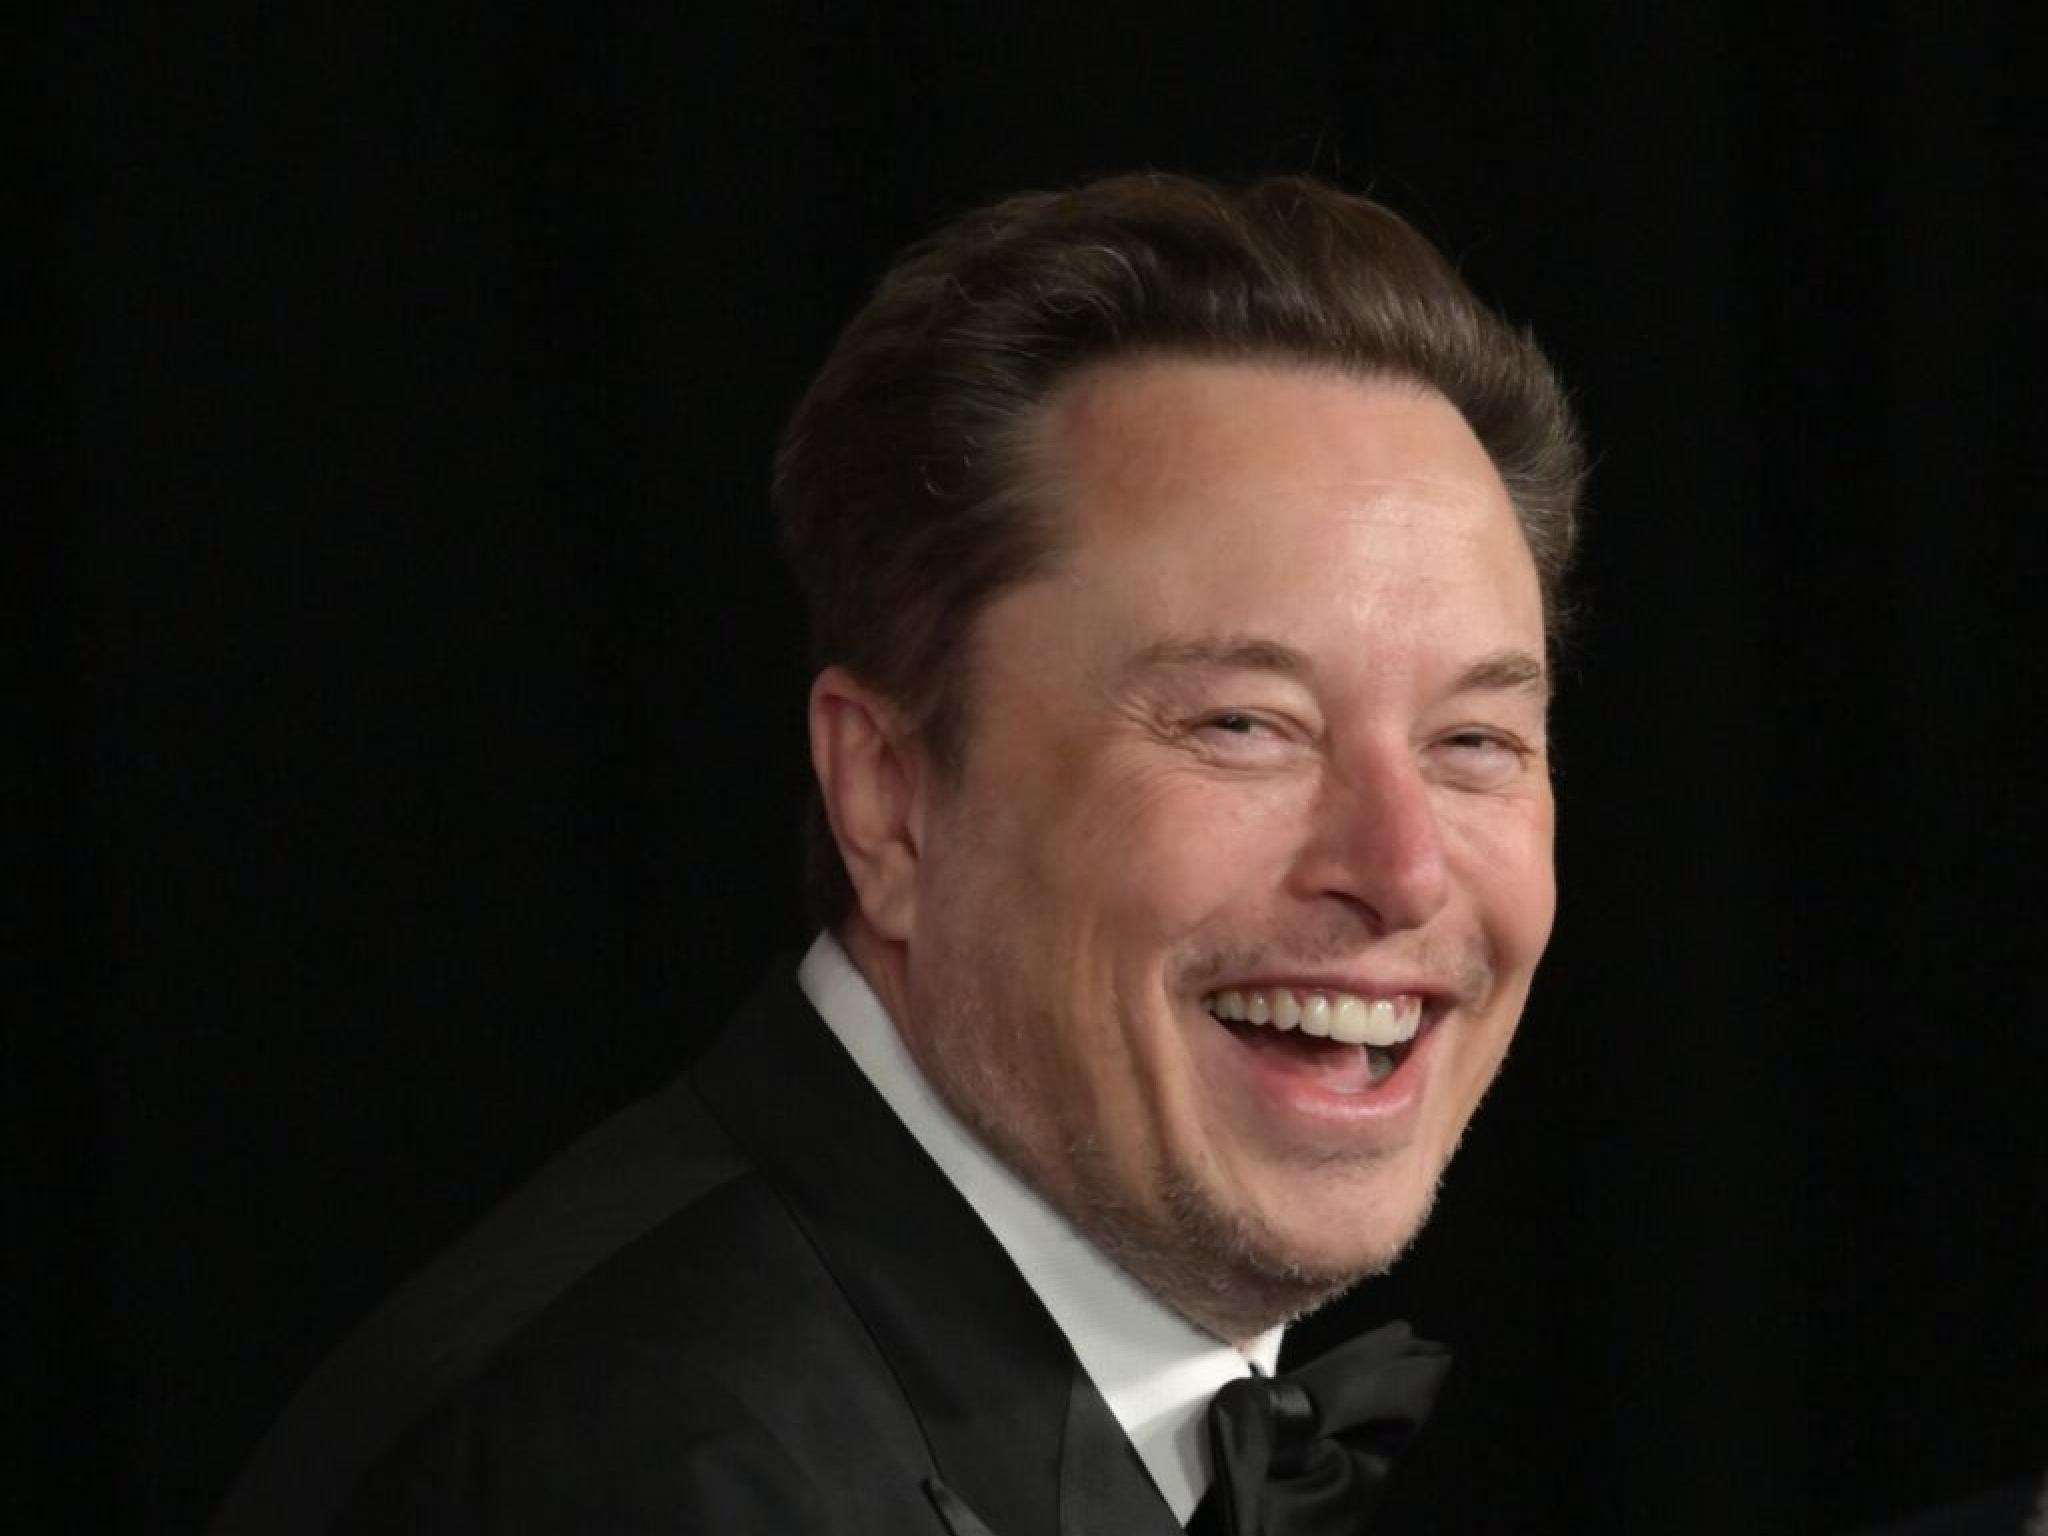  elon-musk-reacts-to-alleged-israeli-airstrike-on-iran-our-tax-dollars-somehow-also-blowing-up-our-tax-dollars 